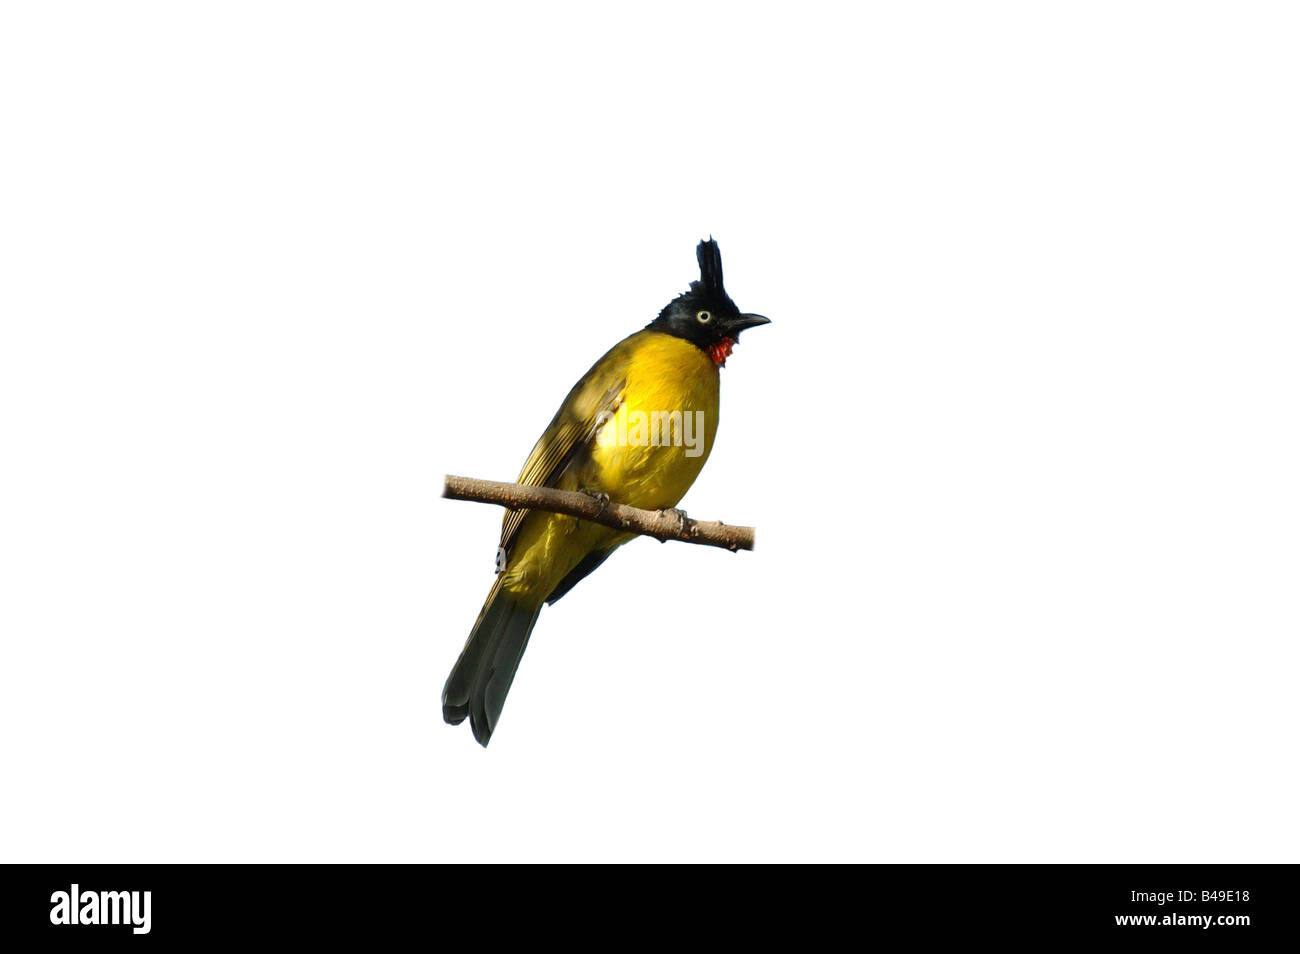 Cut-out of a Black-crested Bulbul taken in Khao Yai National Park, Thailand Stock Photo